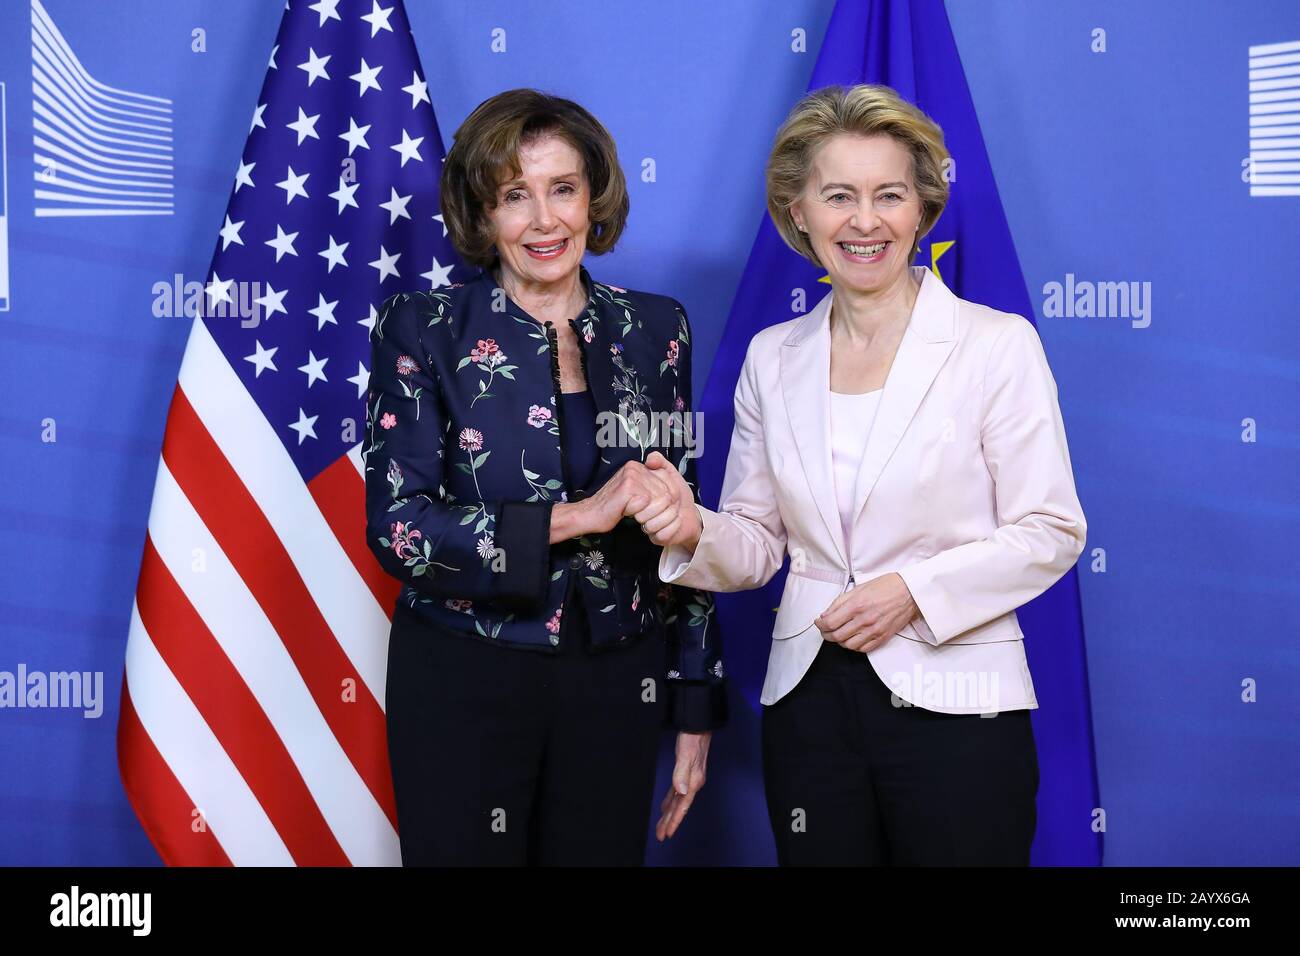 Brussels, Belgium. 17th Feb, 2020. European Commission President Ursula Von der Leyen (R) shakes hands with U.S. House Speaker Nancy Pelosi as the latter pays a visit to the EU headquarters in Brussels, Belgium, Feb. 17, 2020. Credit: Zhang Cheng/Xinhua/Alamy Live News Stock Photo